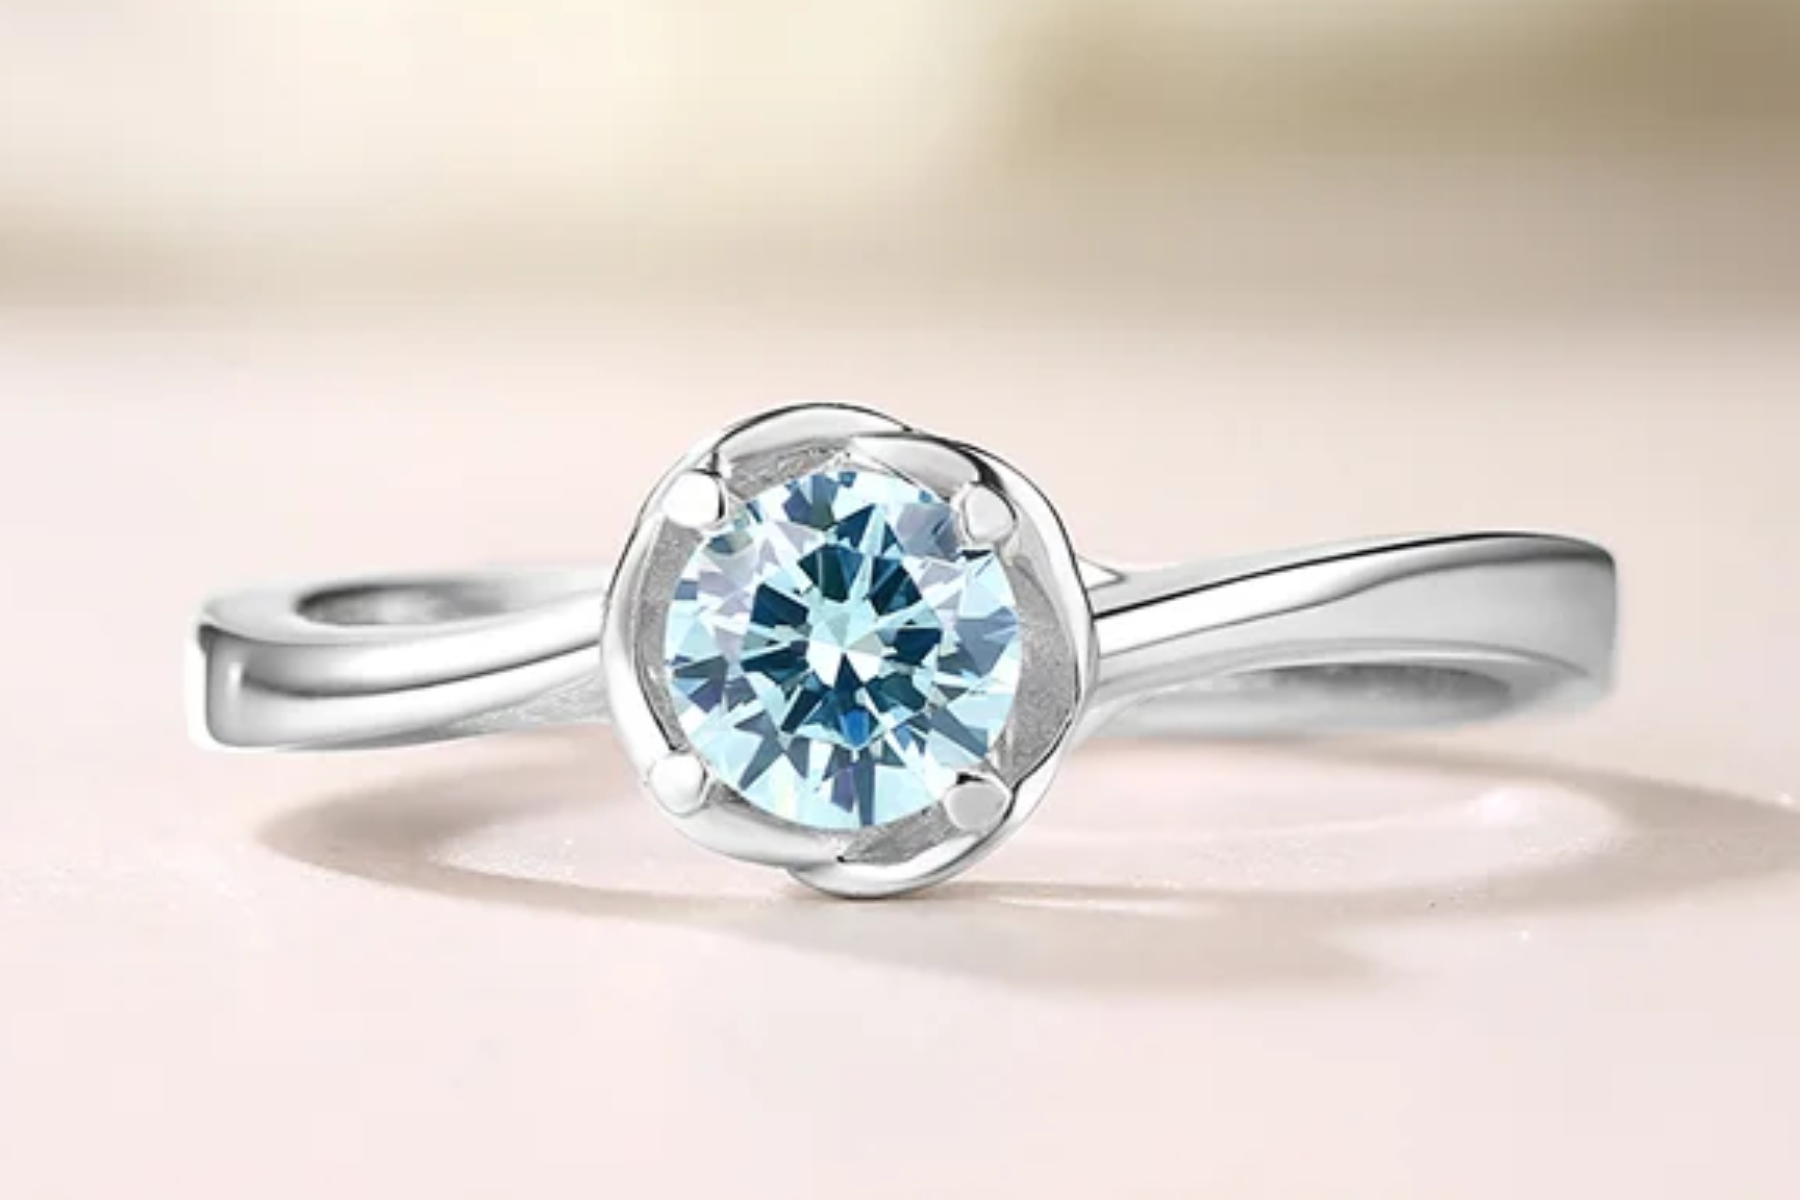 Solitaire birthstone ring with blue stone